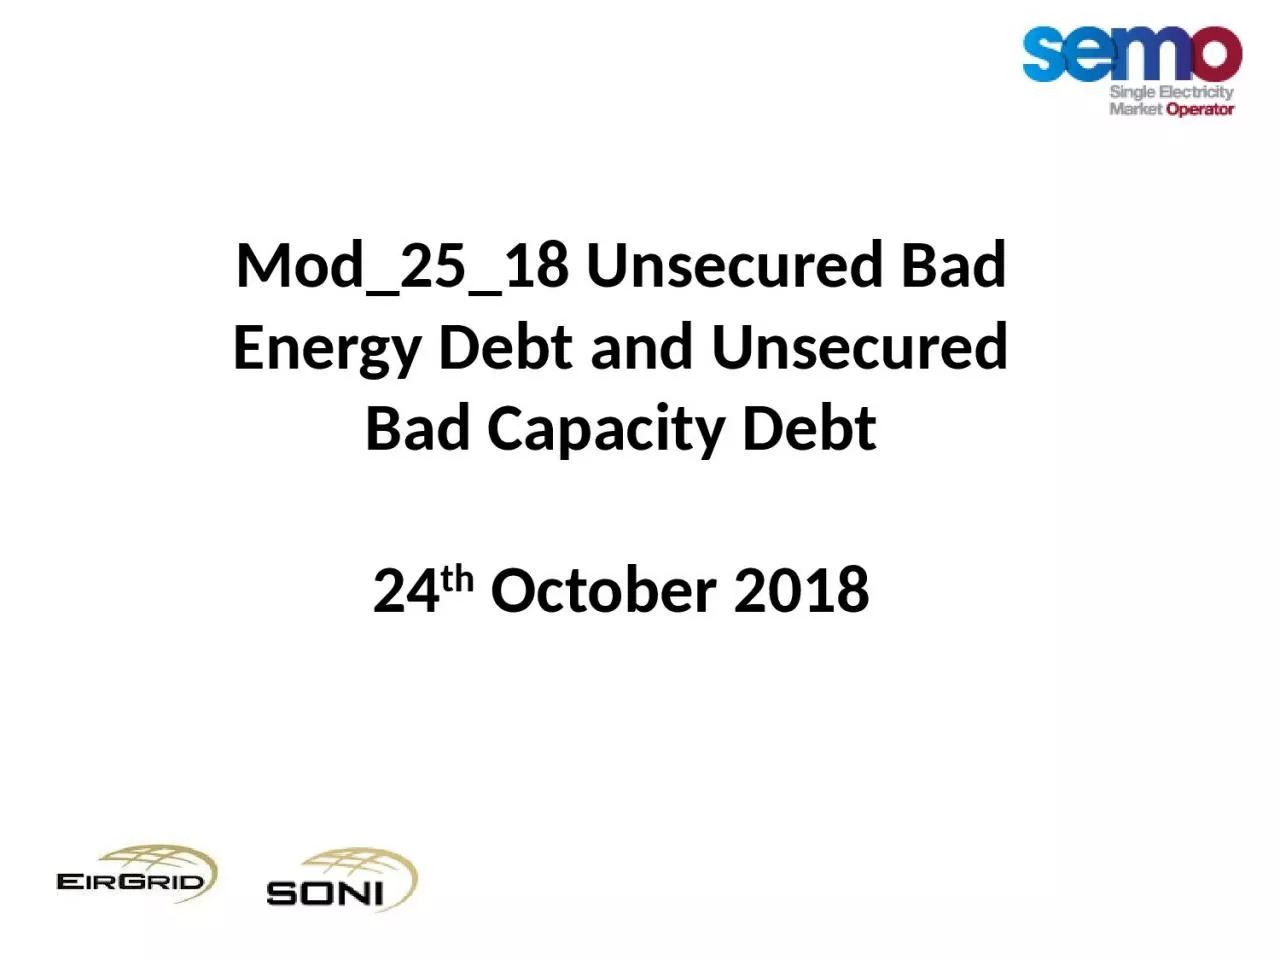 Mod_25_18 Unsecured Bad Energy Debt and Unsecured Bad Capacity Debt